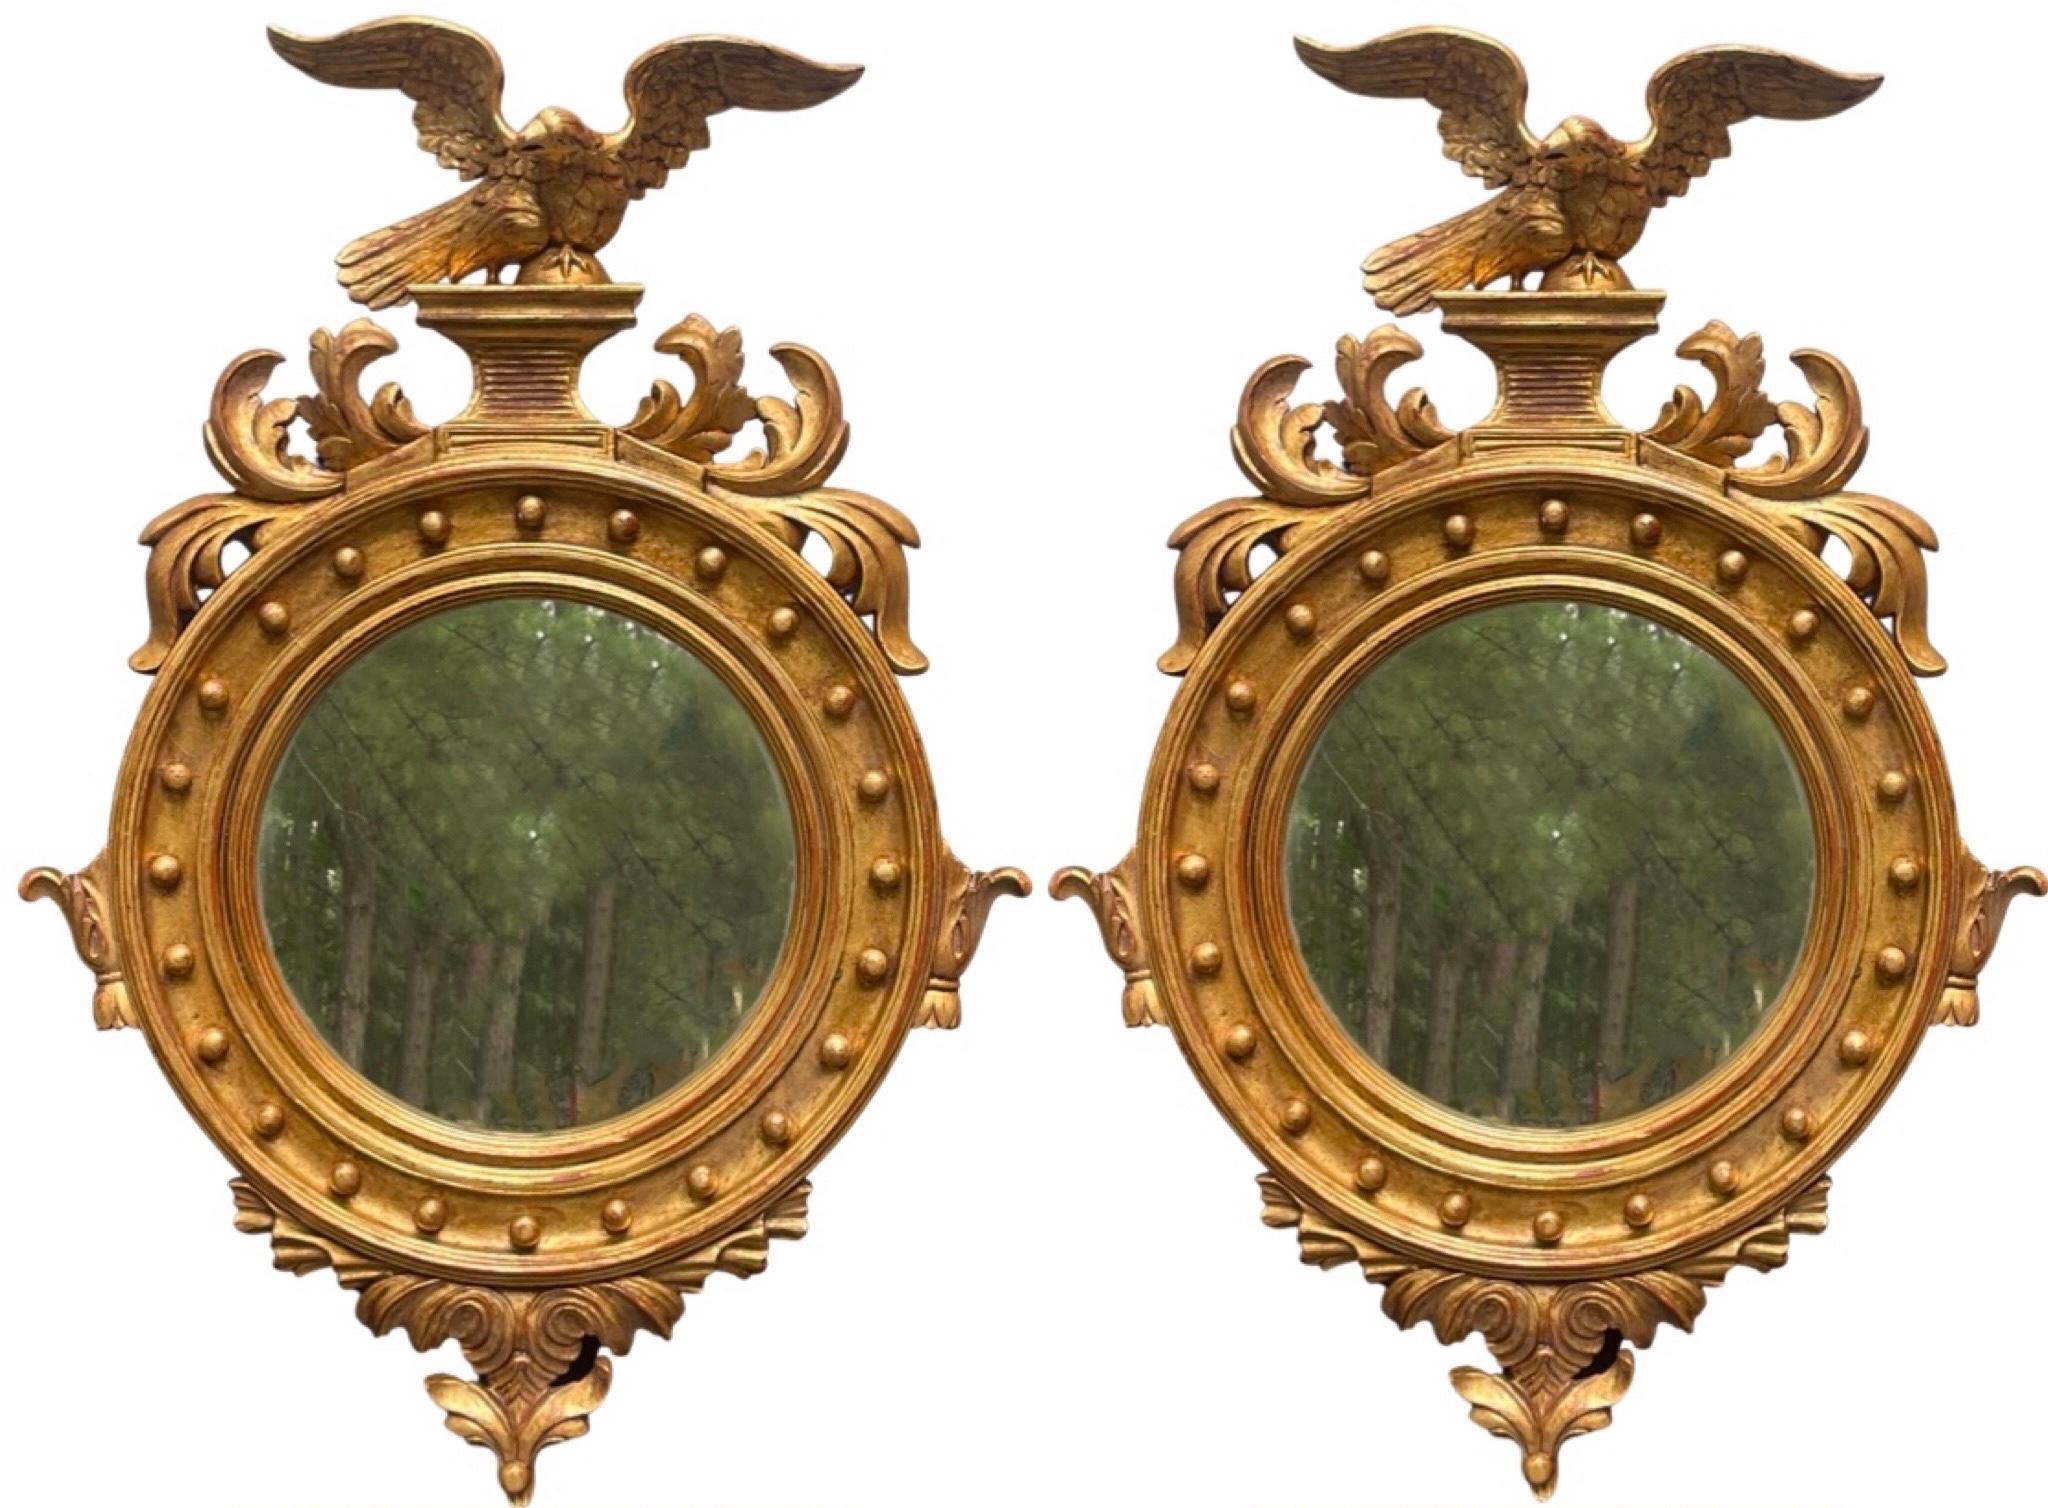 20th Century Mid-Century Italian Carved Eagle Giltwood Federal Style Mirrors, Pair For Sale